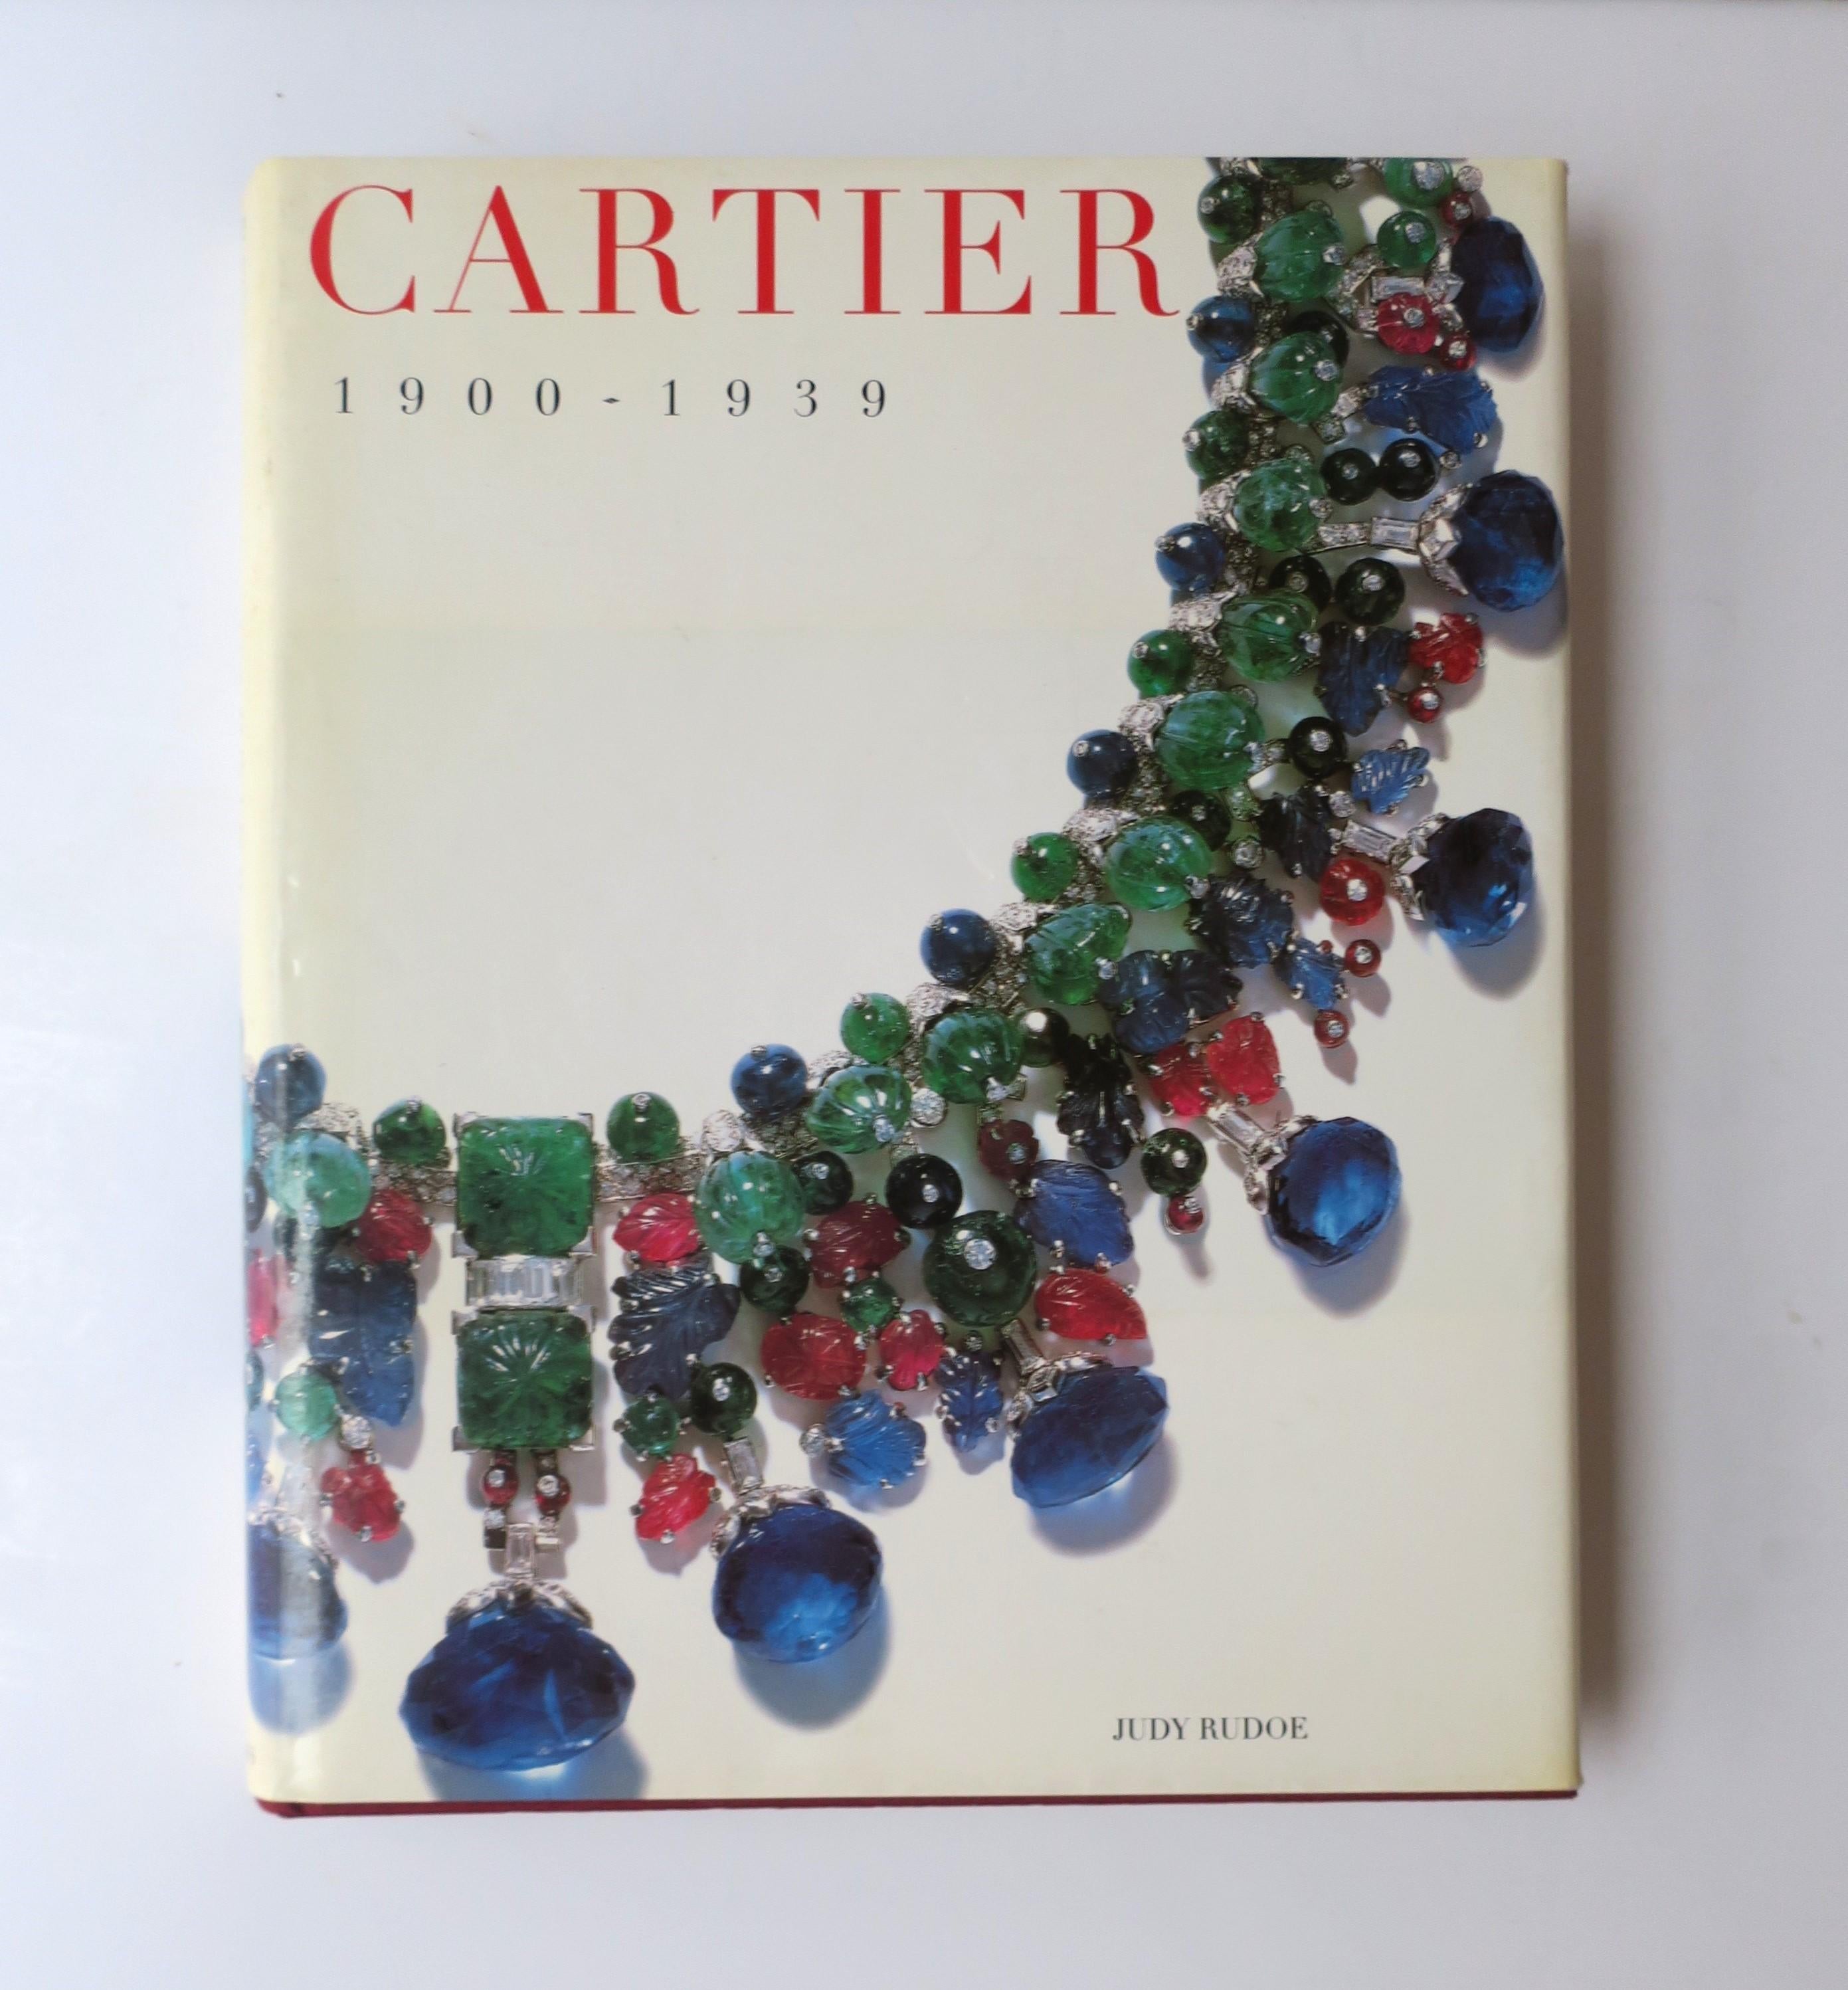 CARTIER 1900 - 1939
Paris, London, New York. 

This special hard-cover book was published in honor of the exhibition, 'Cartier 1900 - 1939', held at The Metropolitan Museum of Art, New York, from April 2, 1997, through August 3, 1997, and the